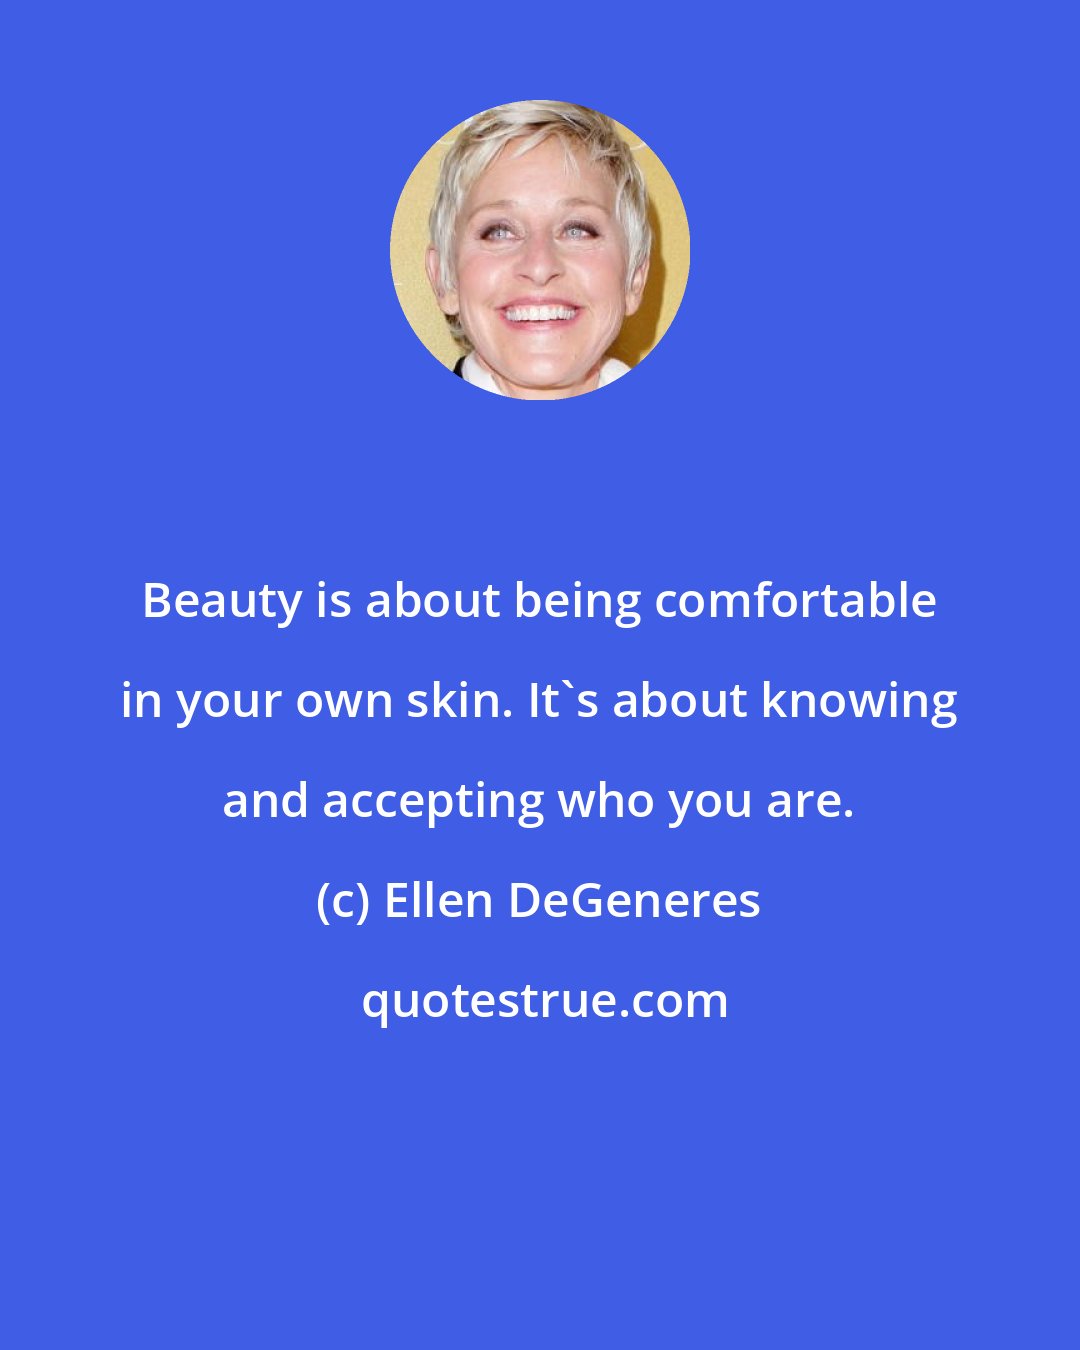 Ellen DeGeneres: Beauty is about being comfortable in your own skin. It's about knowing and accepting who you are.